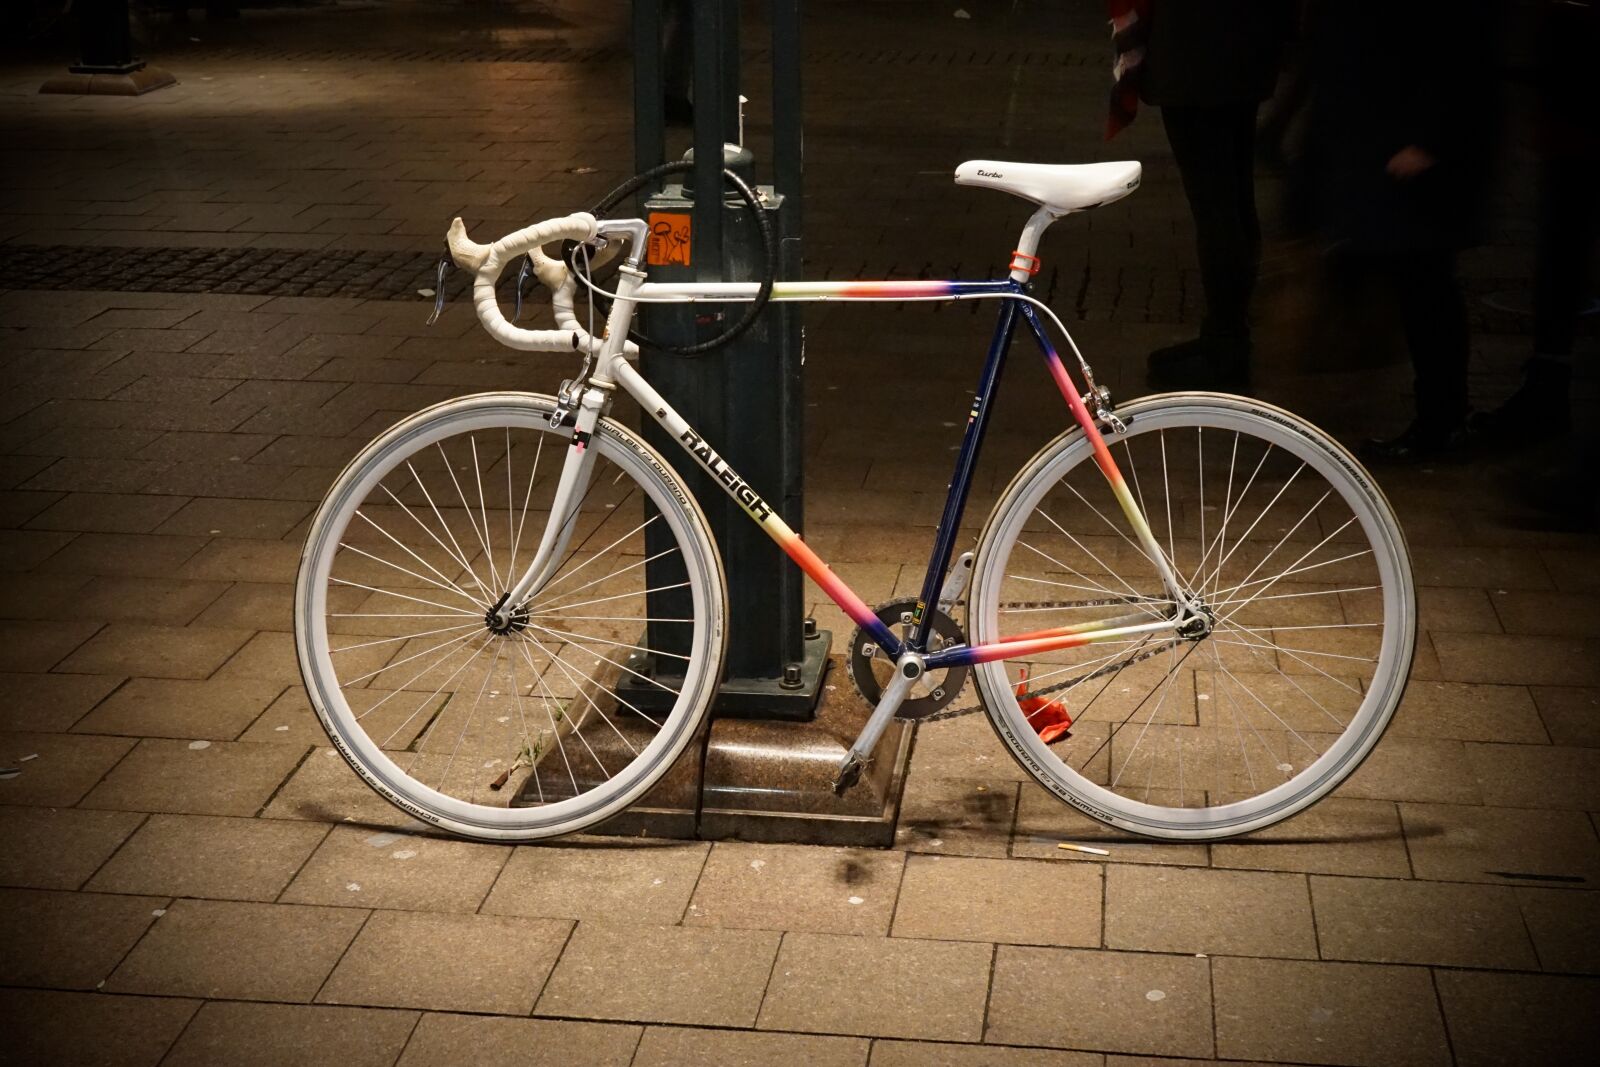 Sony a7 II sample photo. Bike, affiliated, means of photography